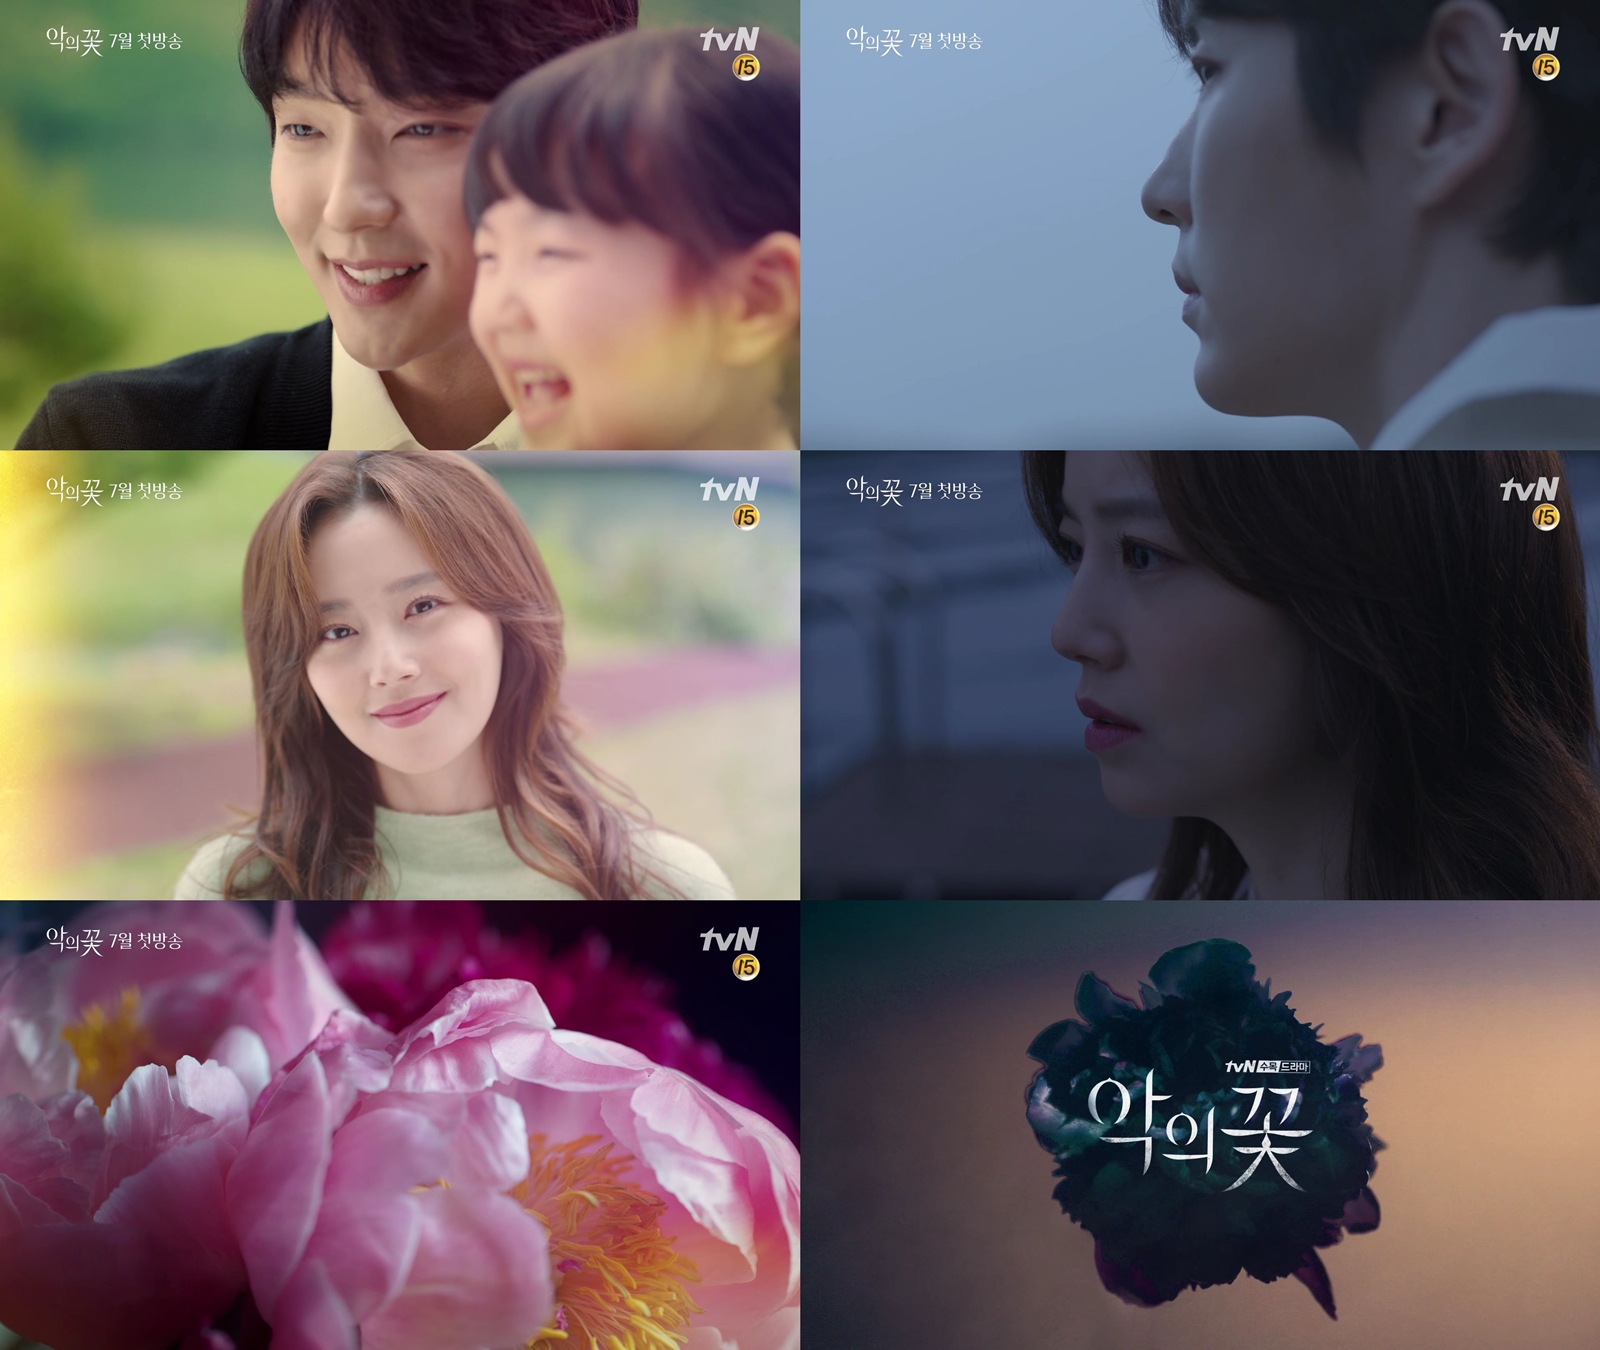 TVN New Tree Drama Flower of Evil made a strong impression by releasing the first teaser video.TVN Flower of Evil released the first teaser video featuring detailed emotional changes and sensual mise-en-scenes of Lee Joon-gi (Baek Hee-seong) and Moon Chae-won (Cha JiWon).The two videos released were made with the gaze of the couple, Baek Hee-Seong (Lee Joon-gi), who have been in love for 14 years, respectively, and Cha JiWon (Moon Chae-won).The memories of marriage pass through the warm eyes looking at each other, affectionate smiles, grasped hands, and the time with the daughter who runs clear.However, the rocking chair, which had been leaning on together for a while, was empty with only a disorganized blanket, and suddenly two people became alone, and a meaningful airflow was detected.Here, the contrasting atmosphere of the different tones intersects with the color of the melodrama and suspense to be captured by the Flower of Evil once again.Also, the beautiful flowers that were seen at the beginning of the video appear in a black color at the end of the video.I am curious about what kind of stories the flower of evil, which started to sprout between the beliefs and doubts of the two people, will bloom.Meanwhile, Flower of Evil will be broadcasted in July as a high-density emotional tracking drama of two people facing the truth that they want to ignore, the man who played love, Baek Hee-seong, and his wife Cha JiWon, who started to doubt his reality.